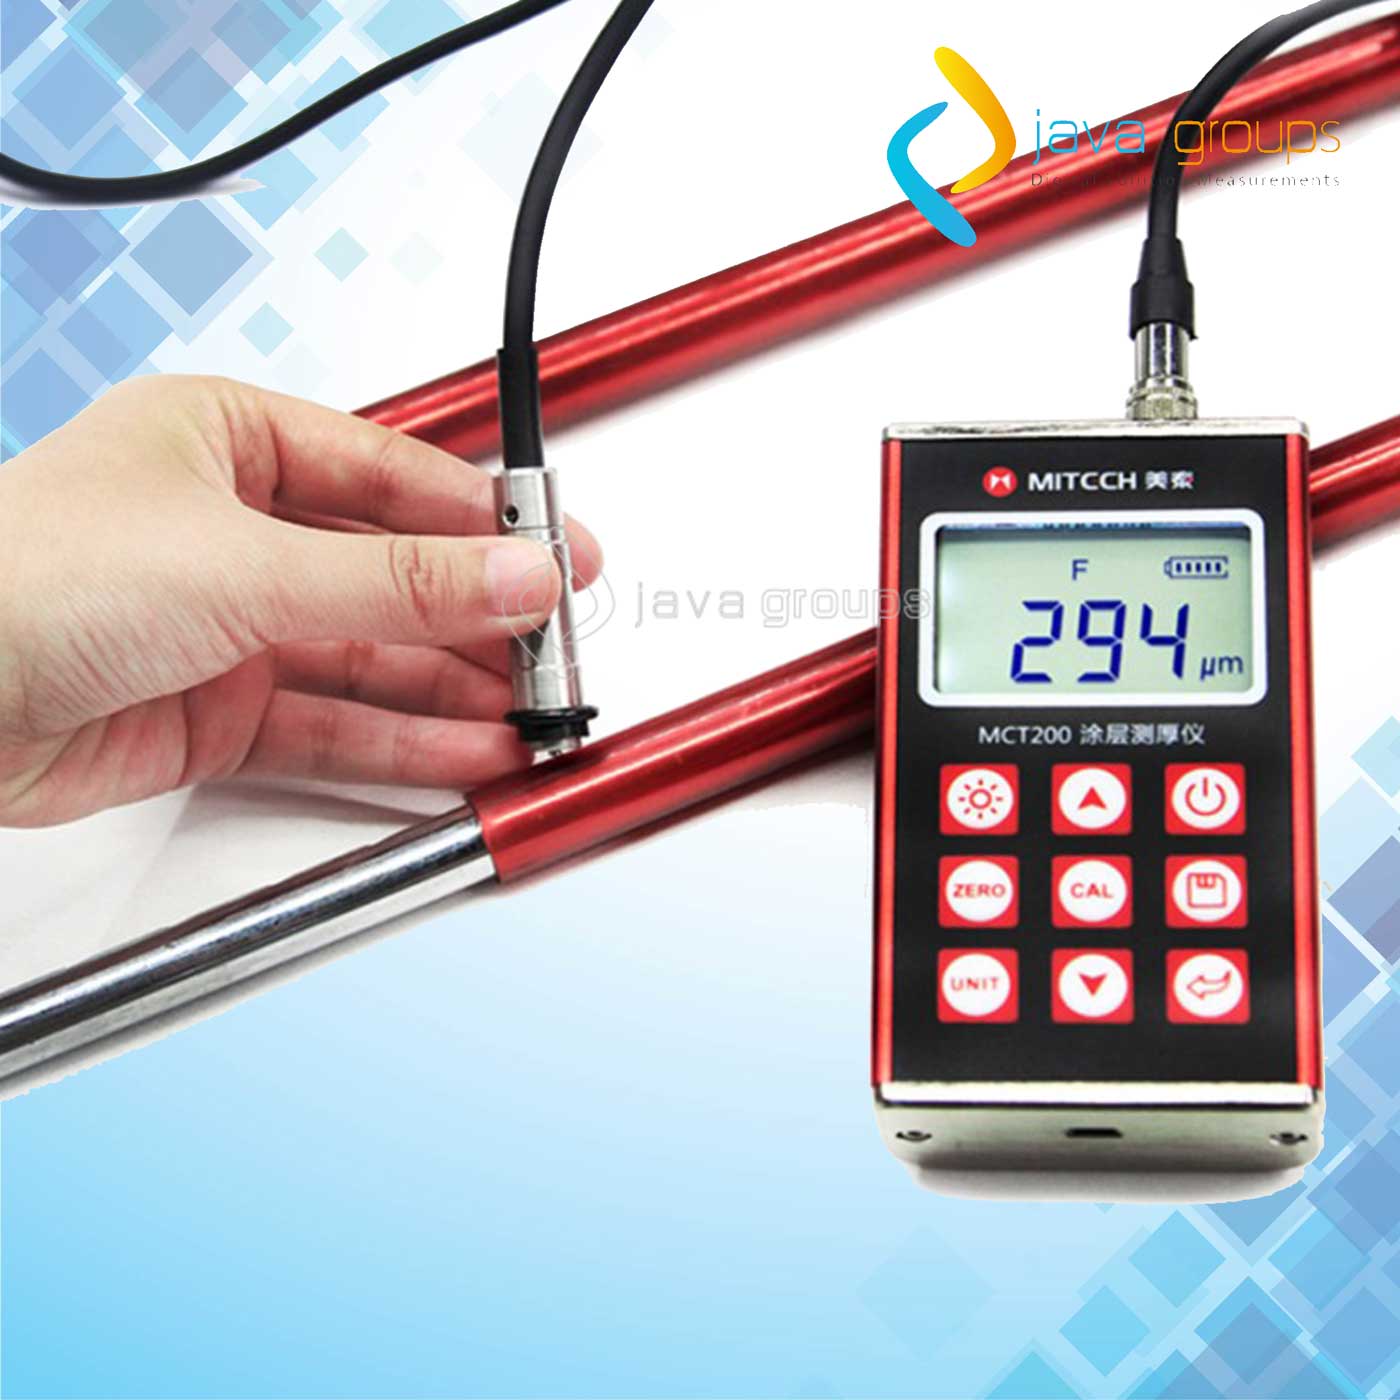 Mitech MCT200 Coating Thickness Gauge